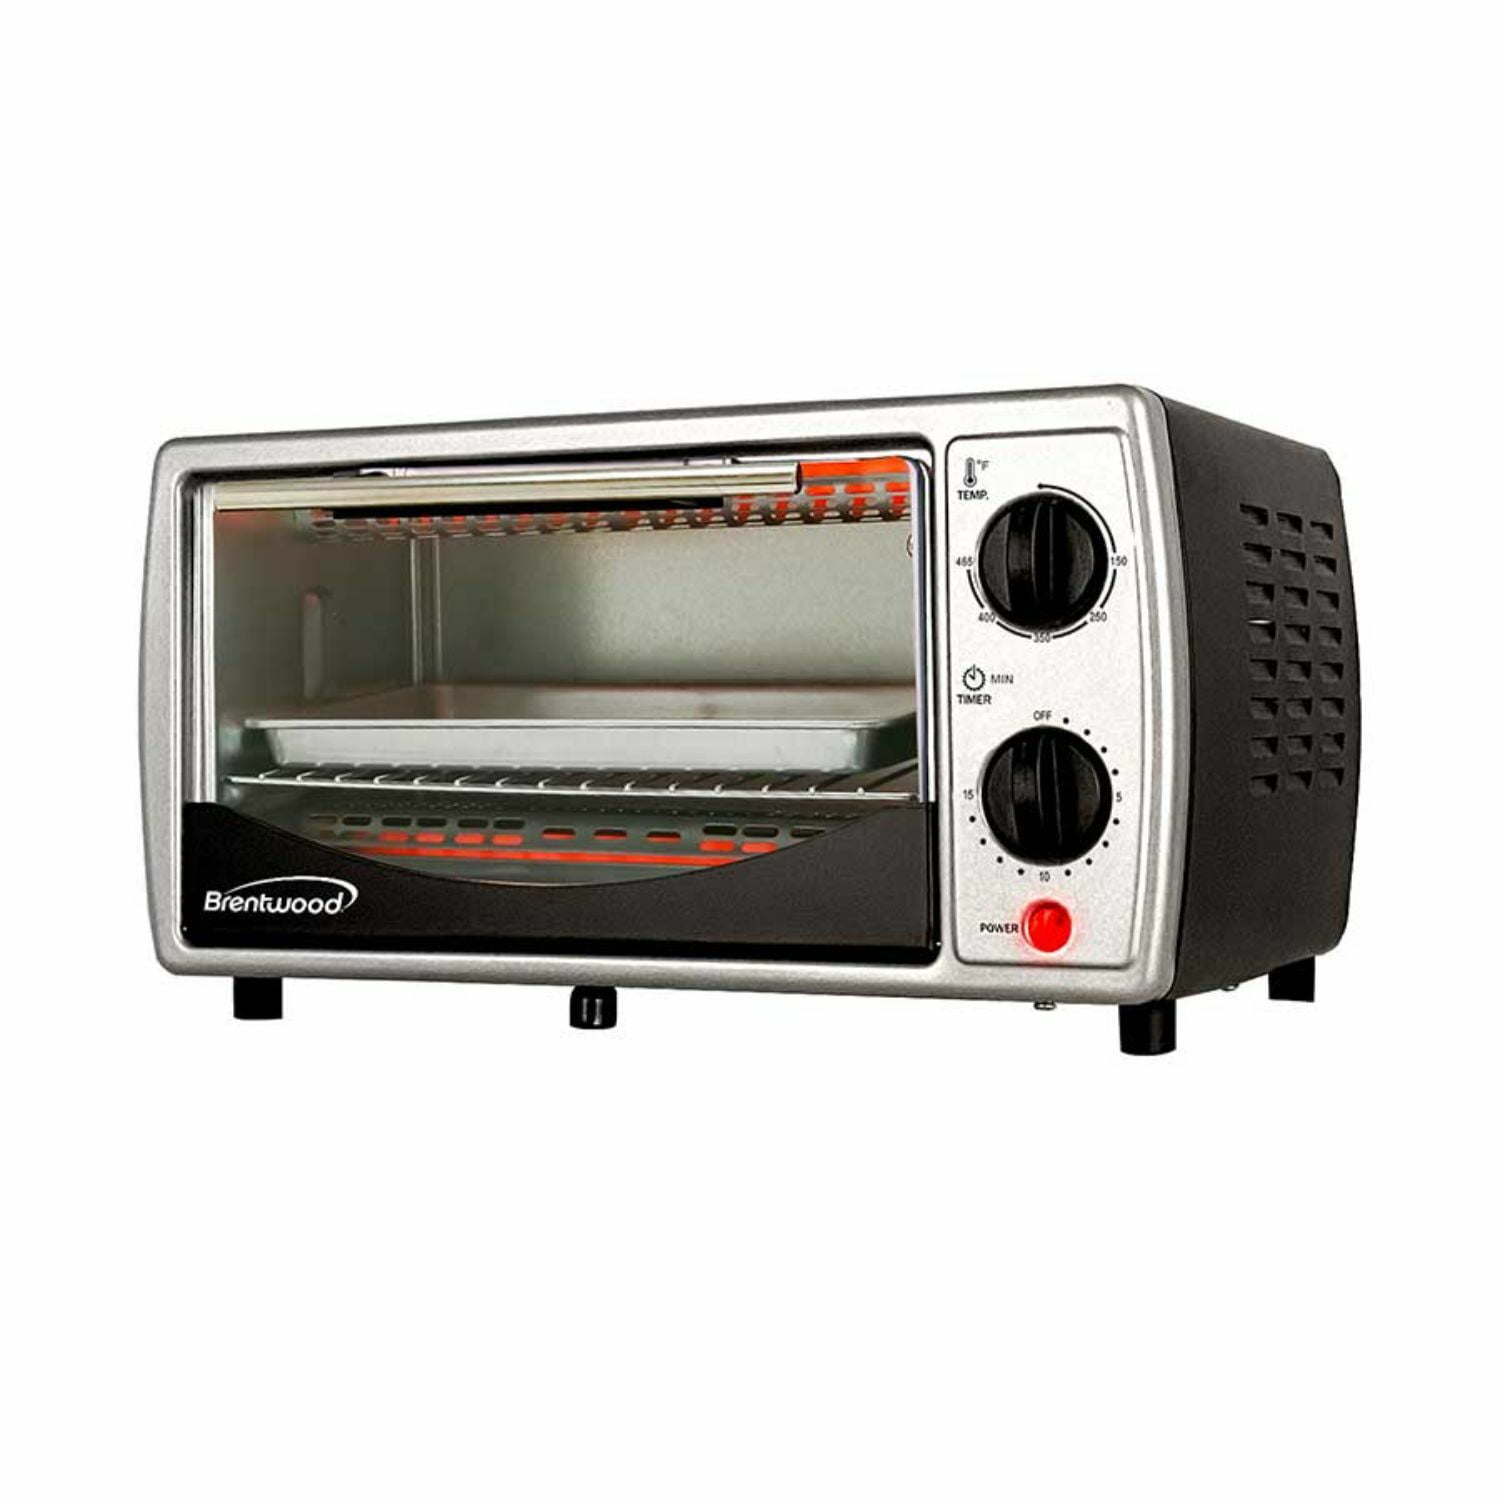 4-Slice Toaster Oven, Easy Controls, Stainless Steel – HightechRed